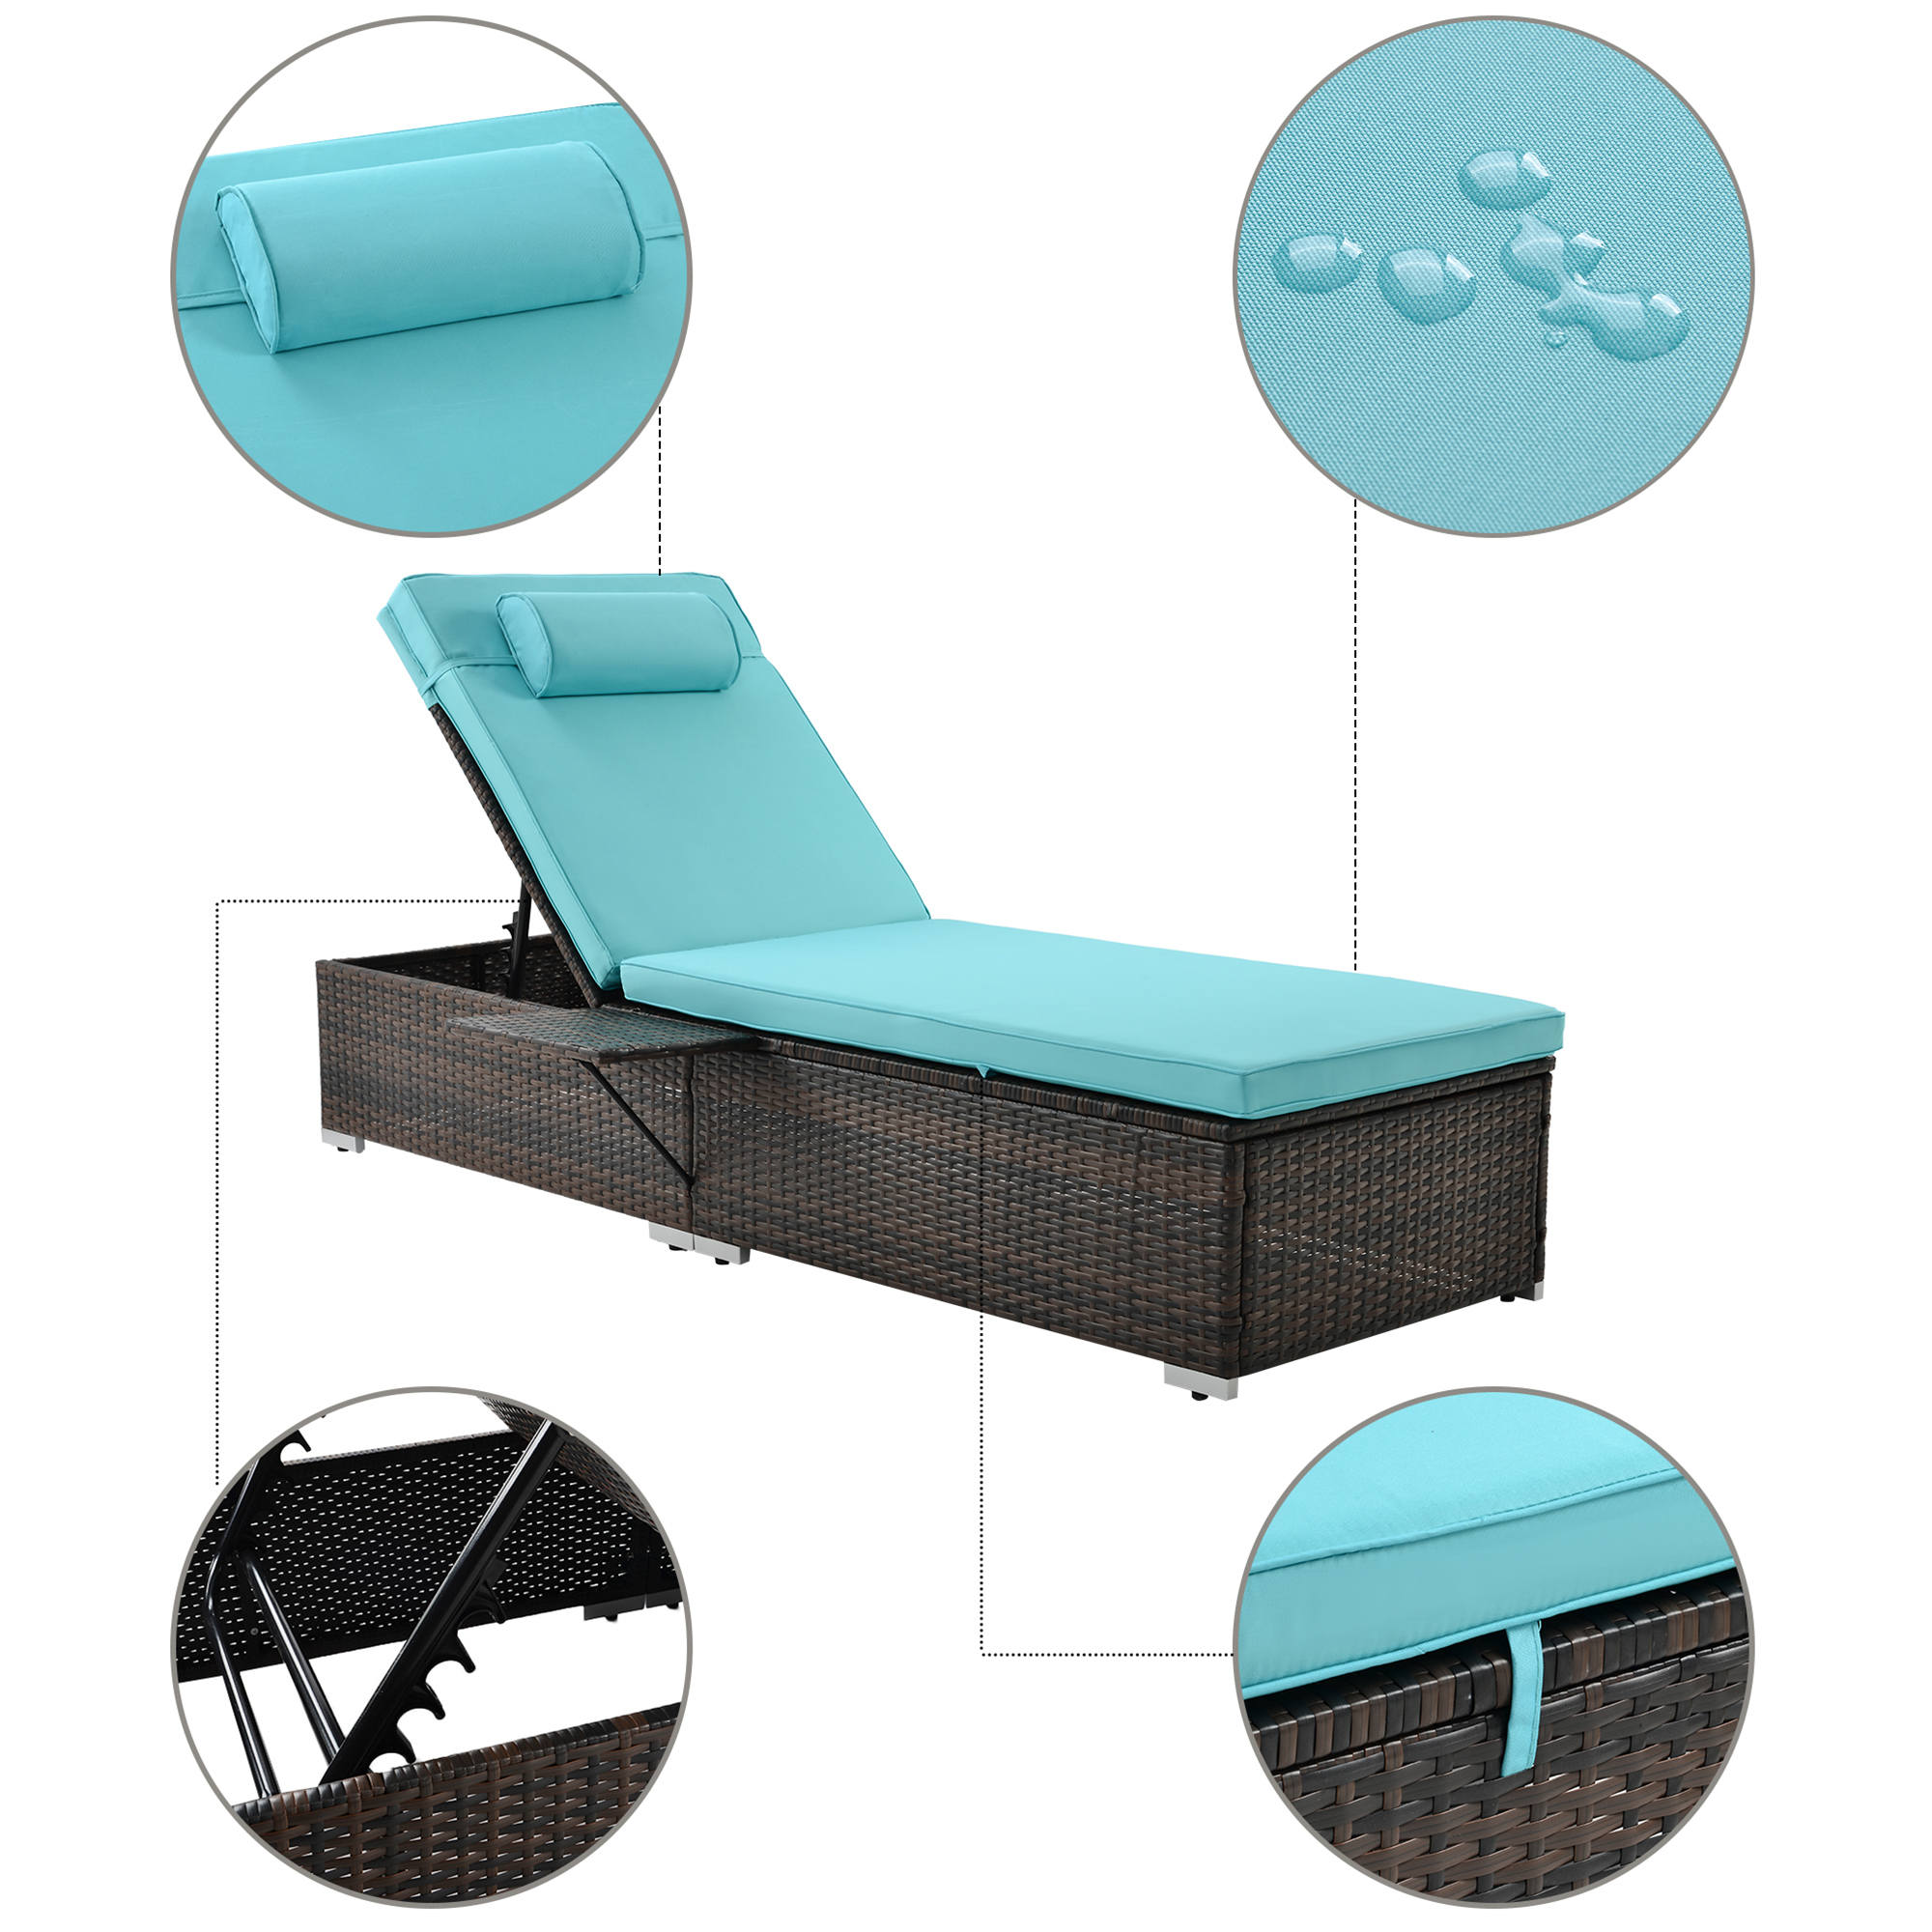 Outdoor PE Wicker Chaise Lounge, 2 Piece Patio Brown Rattan Reclining Chair Furniture Set, Beach Pool Adjustable Backrest Recliners with Side Table and Comfort Head Pillow, Brown - image 4 of 7